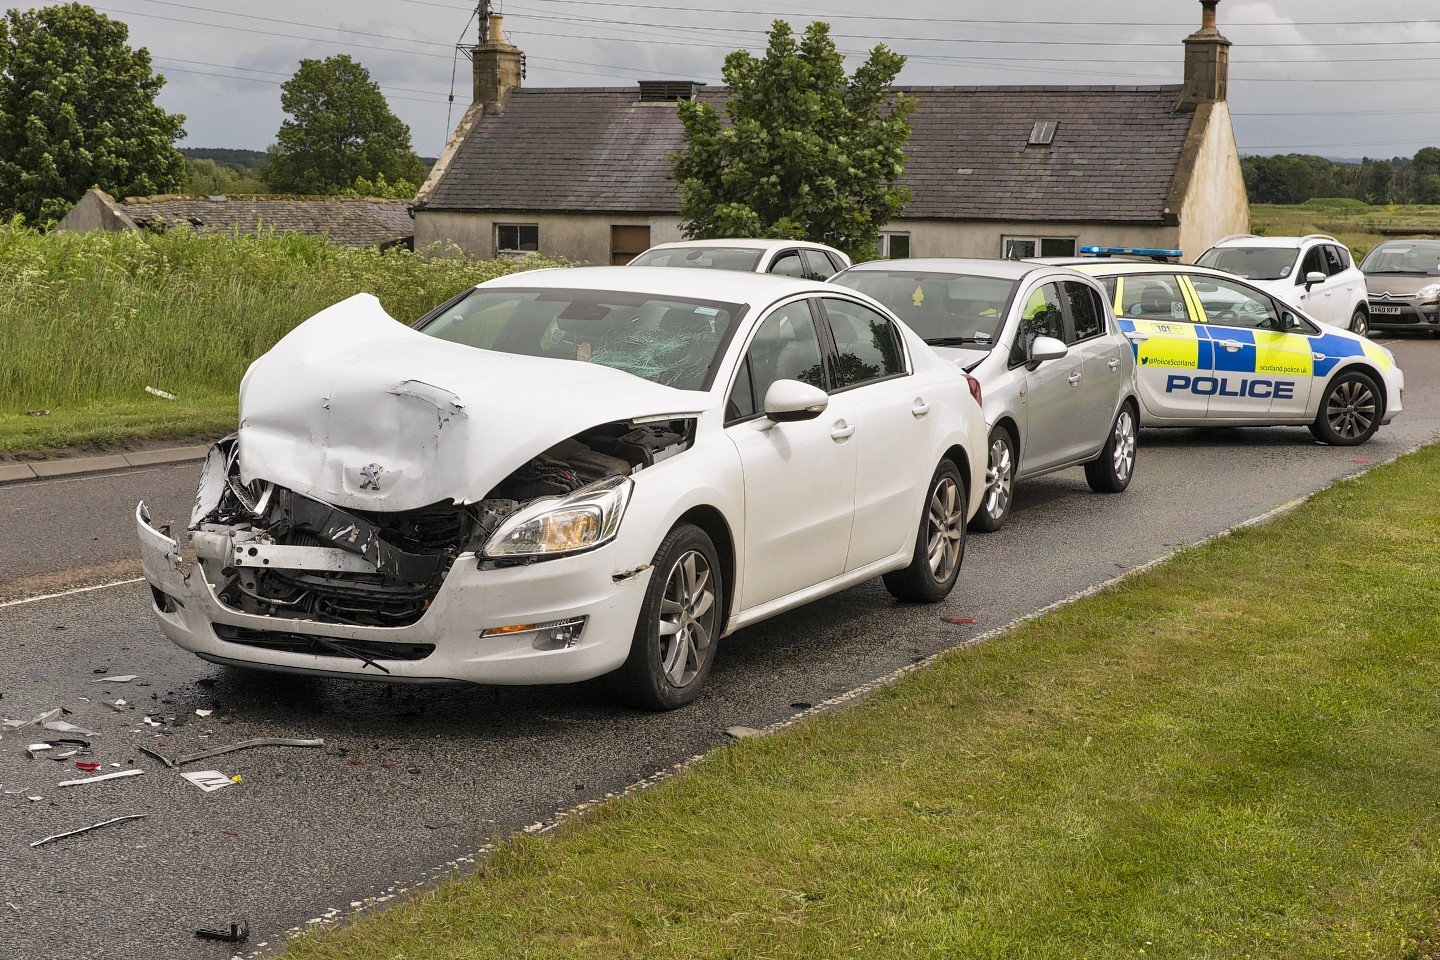 A Peugeot 508 was badly damaged in the crash